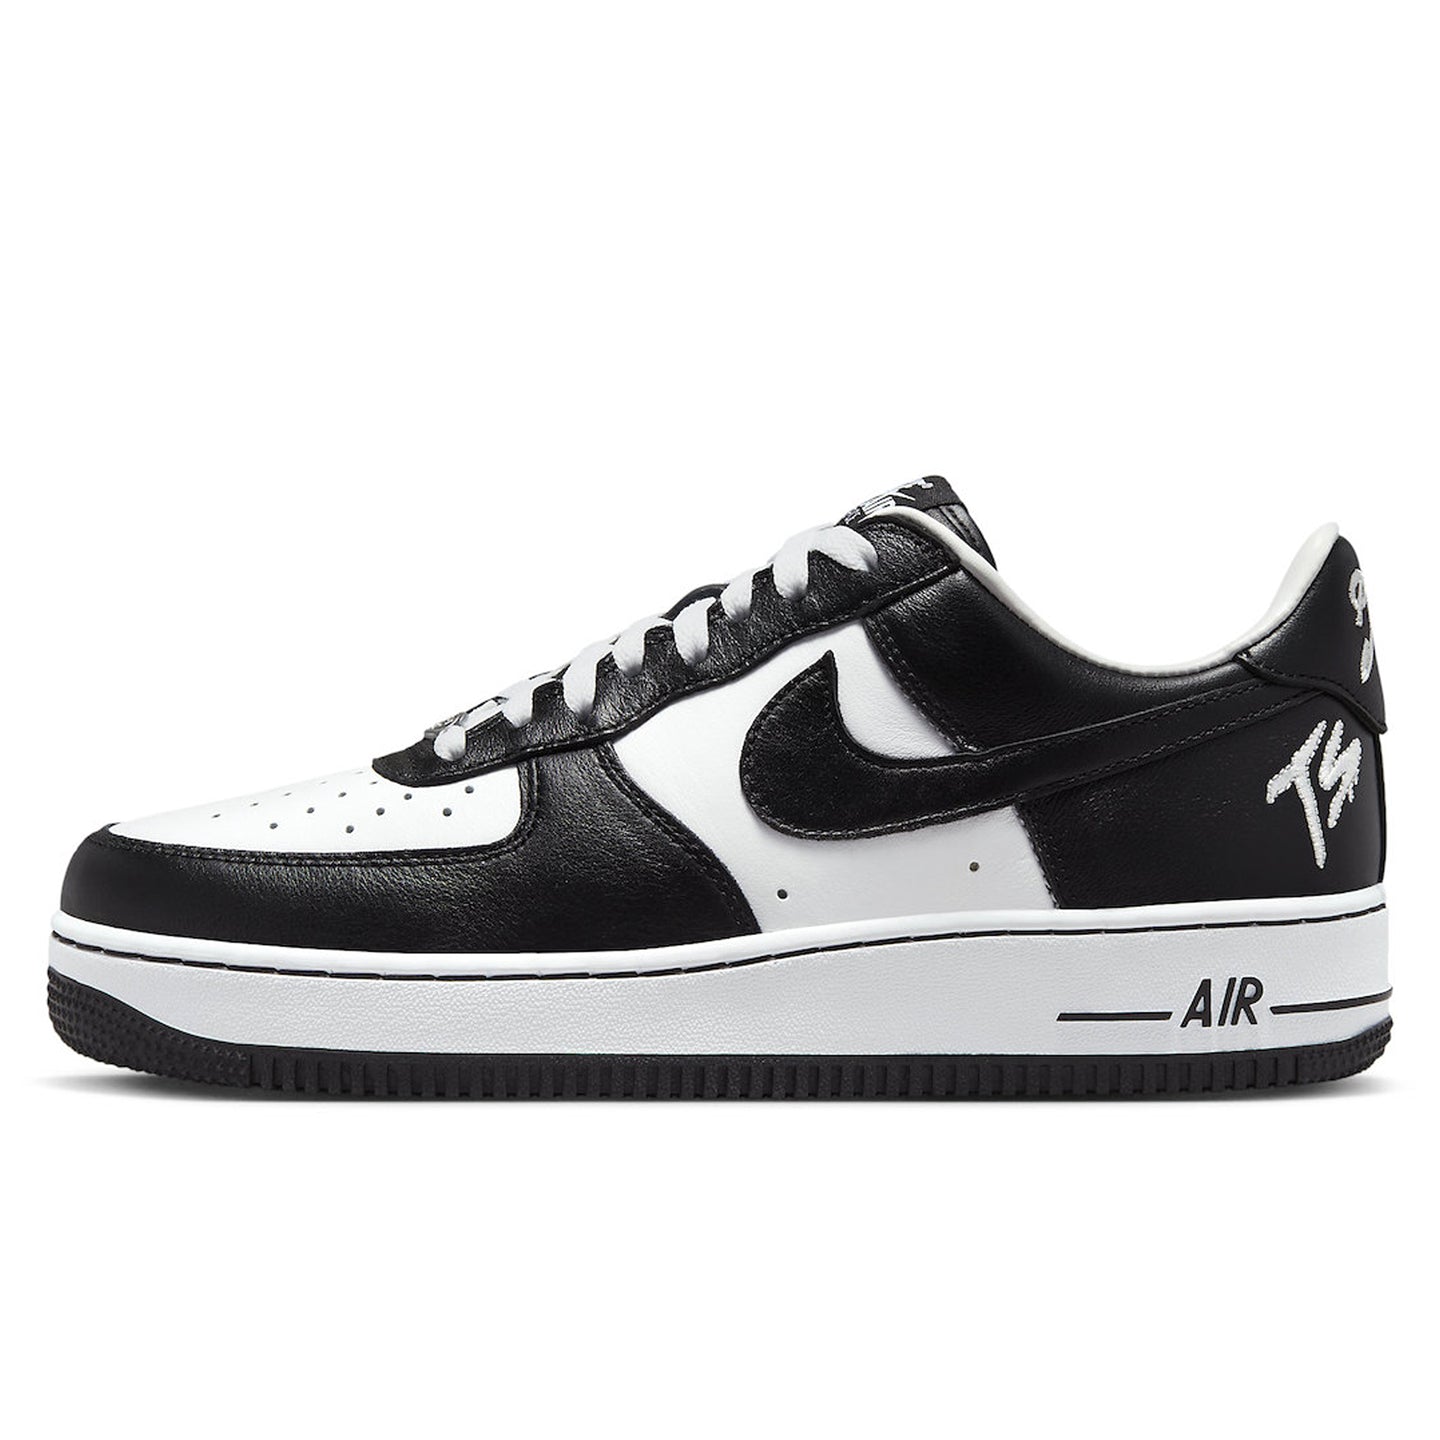 Nike Air Force 1 Low x Terror Squad 'Blackout'